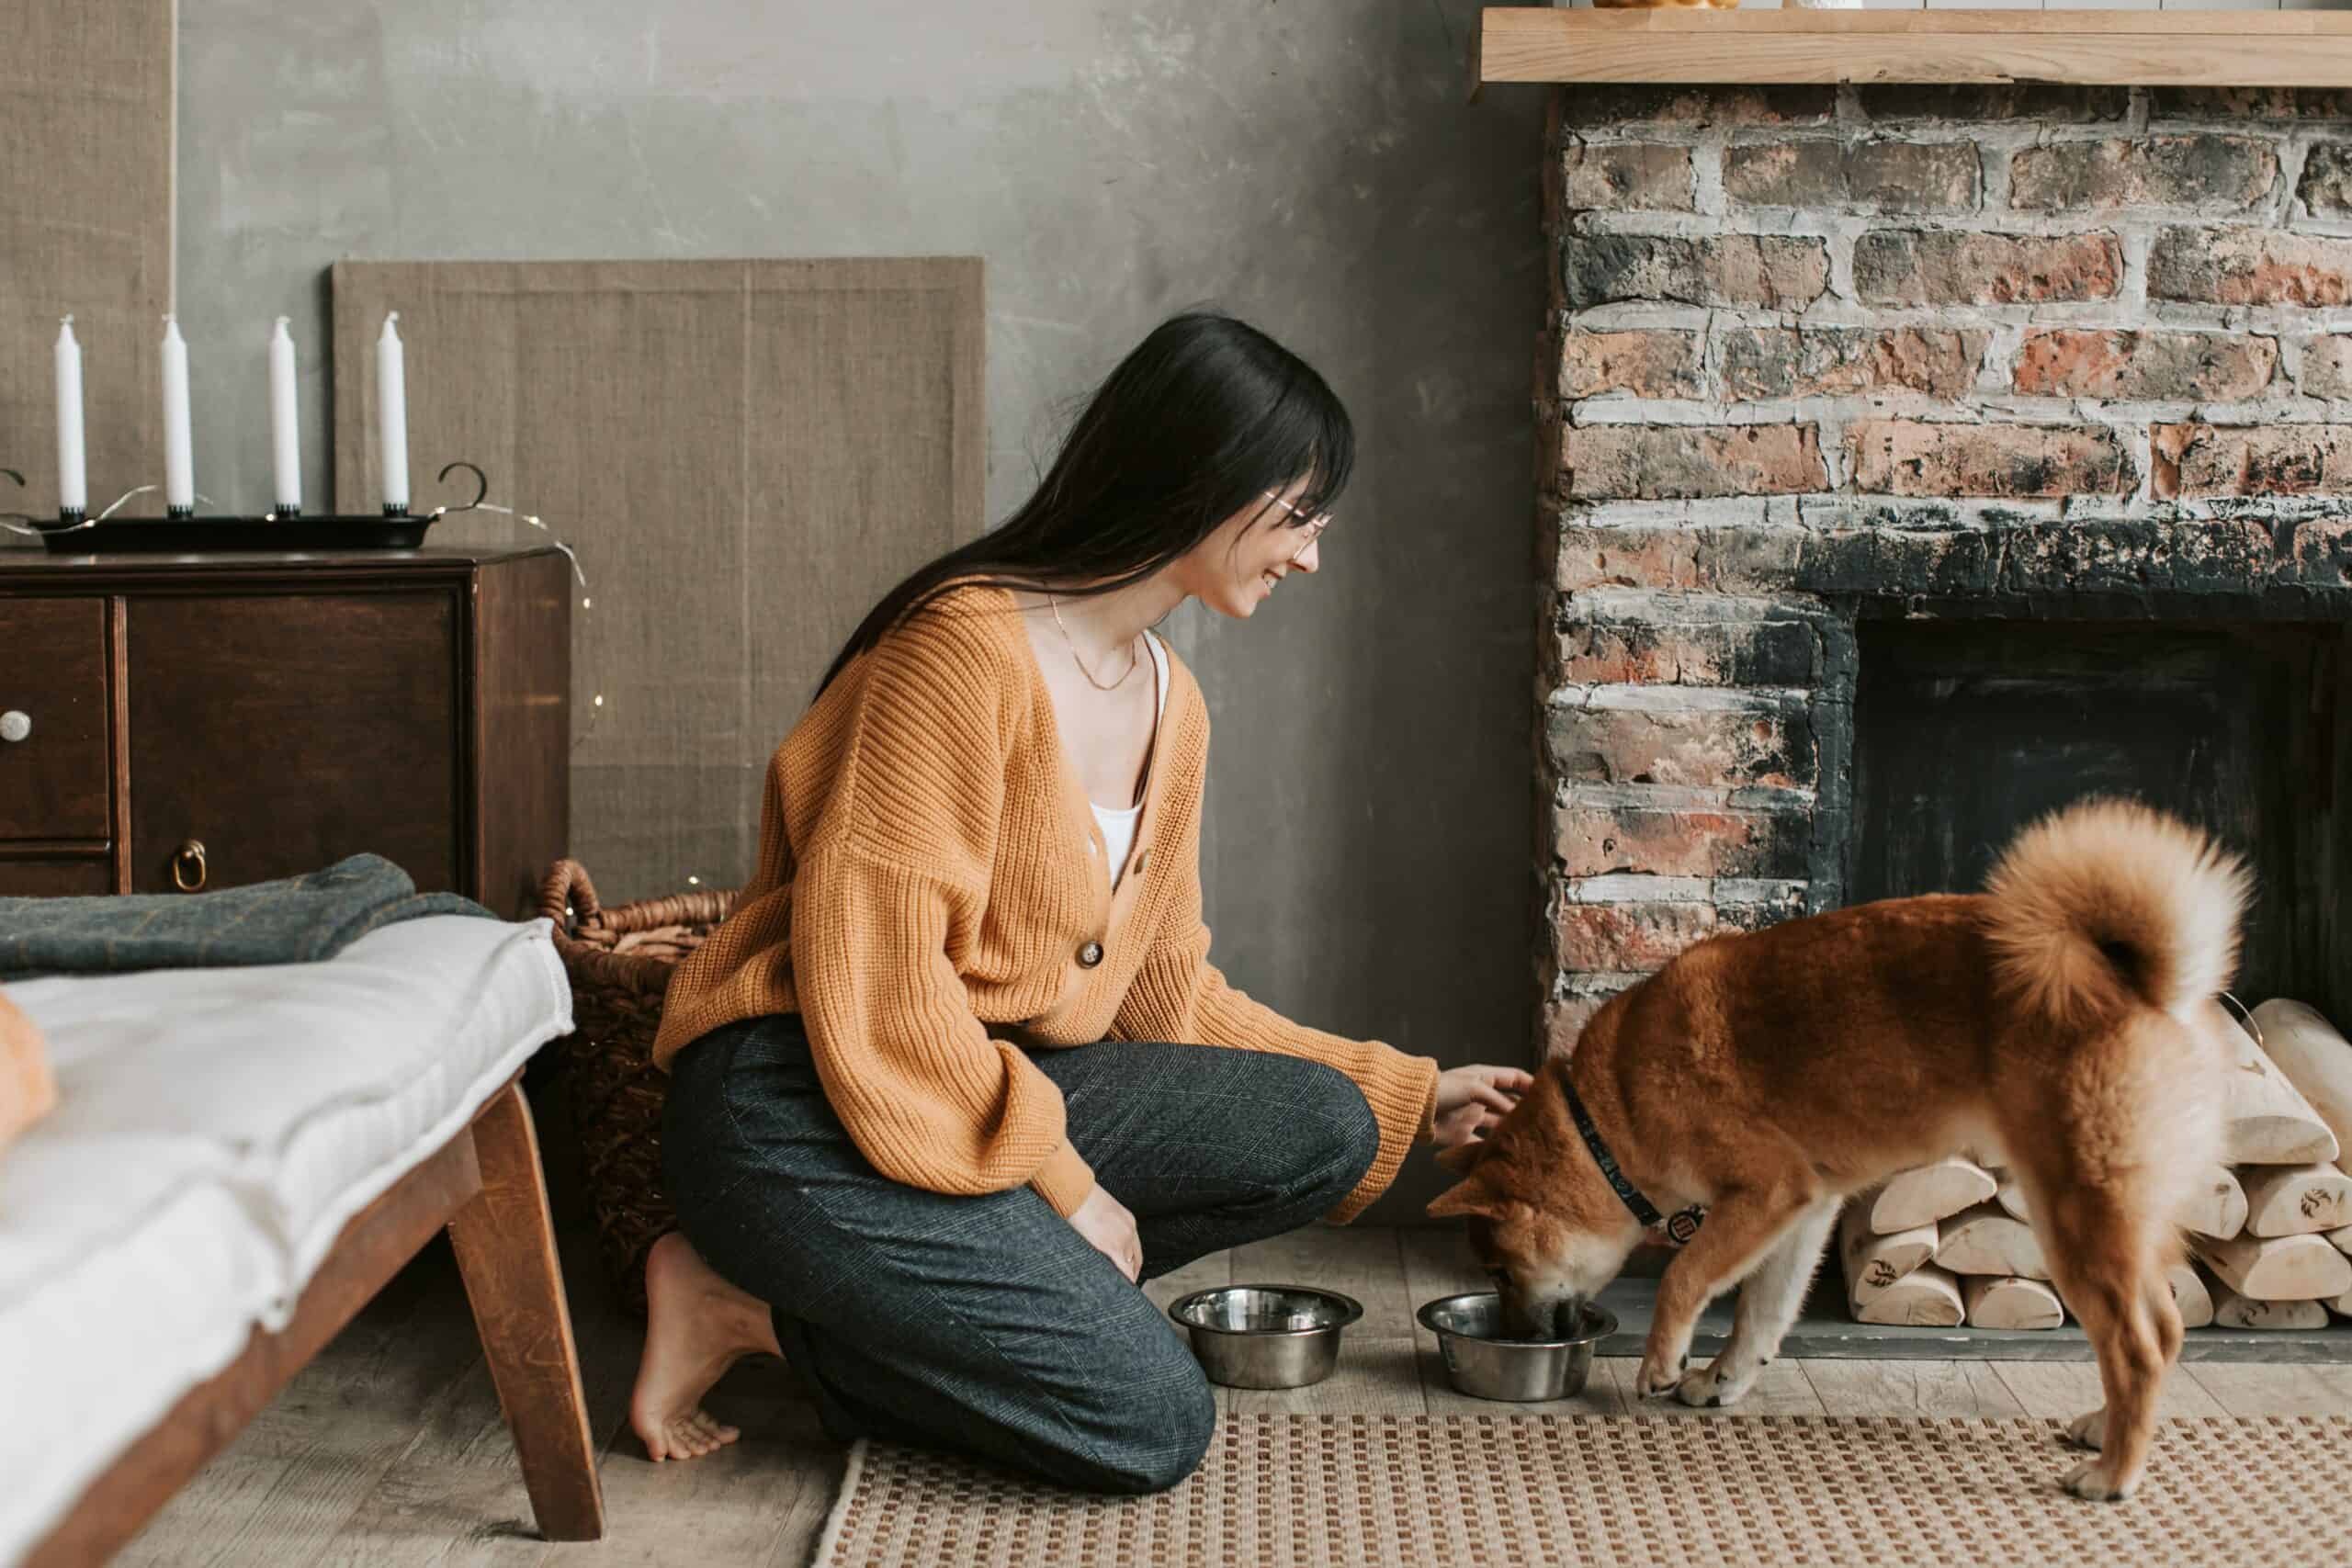 Title image for Tracking your dog's diet with Breedera. Responsible breeder is knelt down next to dog in a home setting.